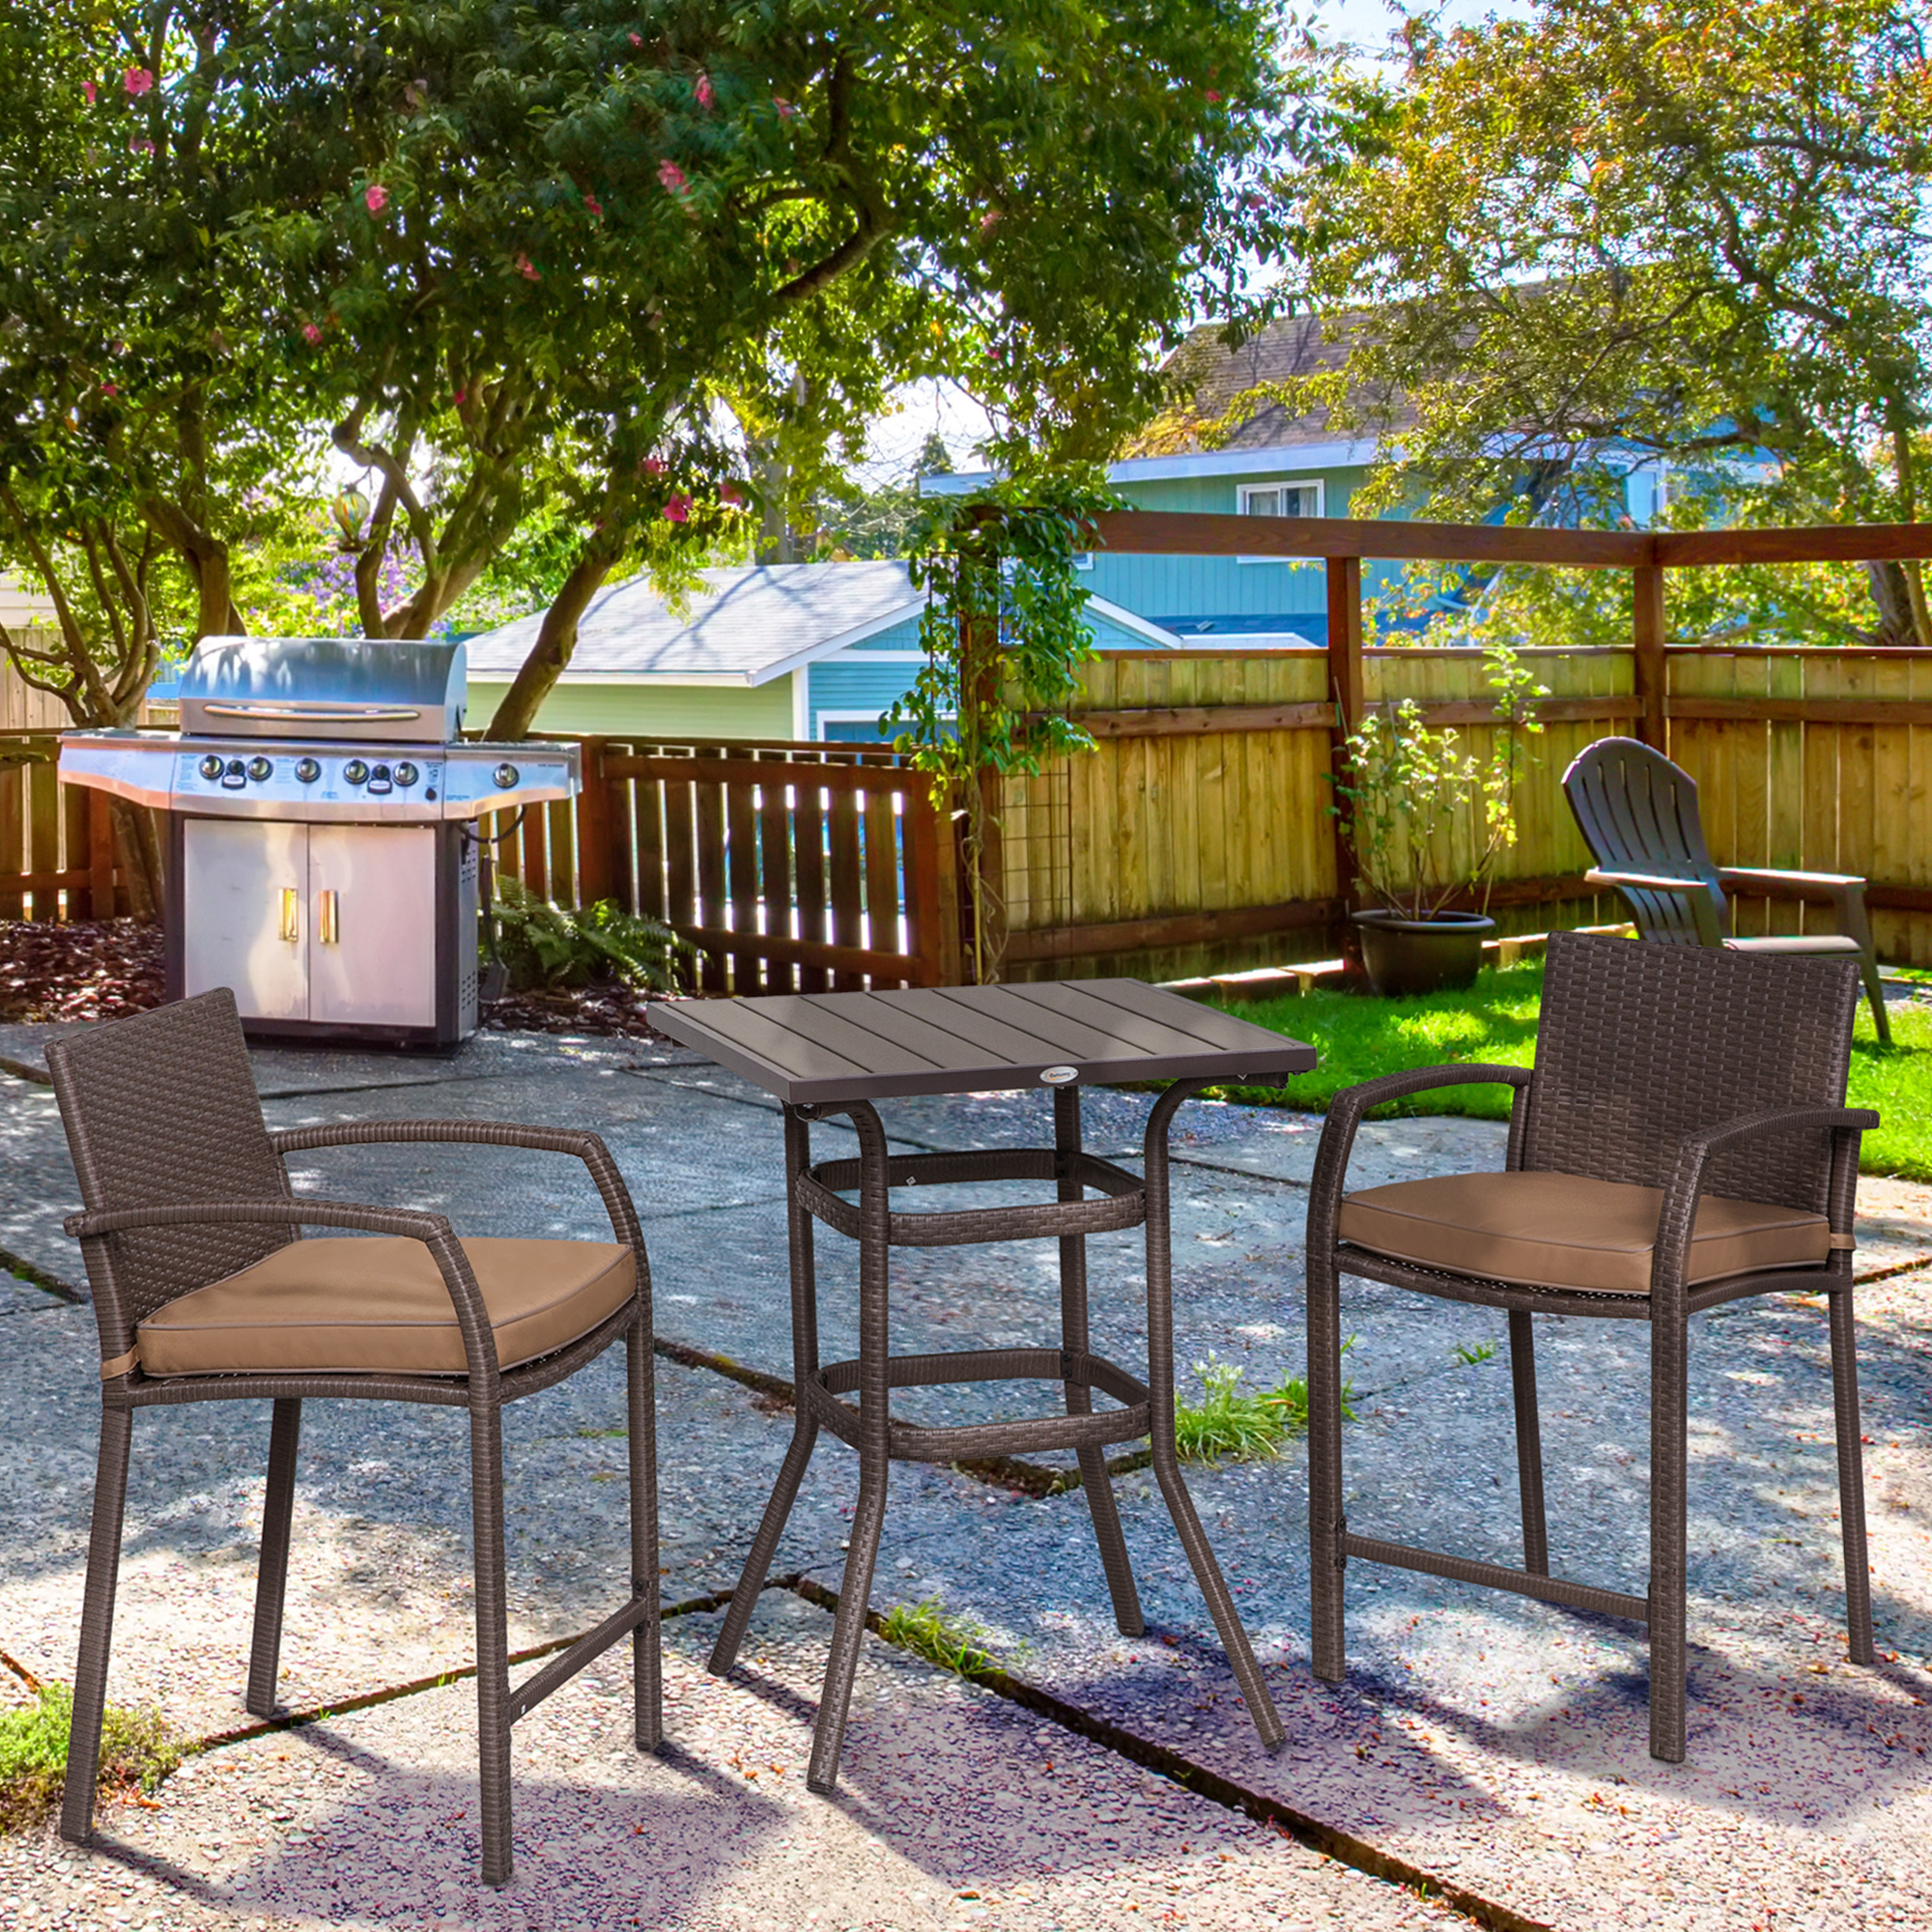 Outsunny 3 PCS Rattan Wicker Bar Set with Wood Grain Top Table and 2 Bar Stools for Outdoor, Patio, Poolside, Garden, Brown - image 2 of 9